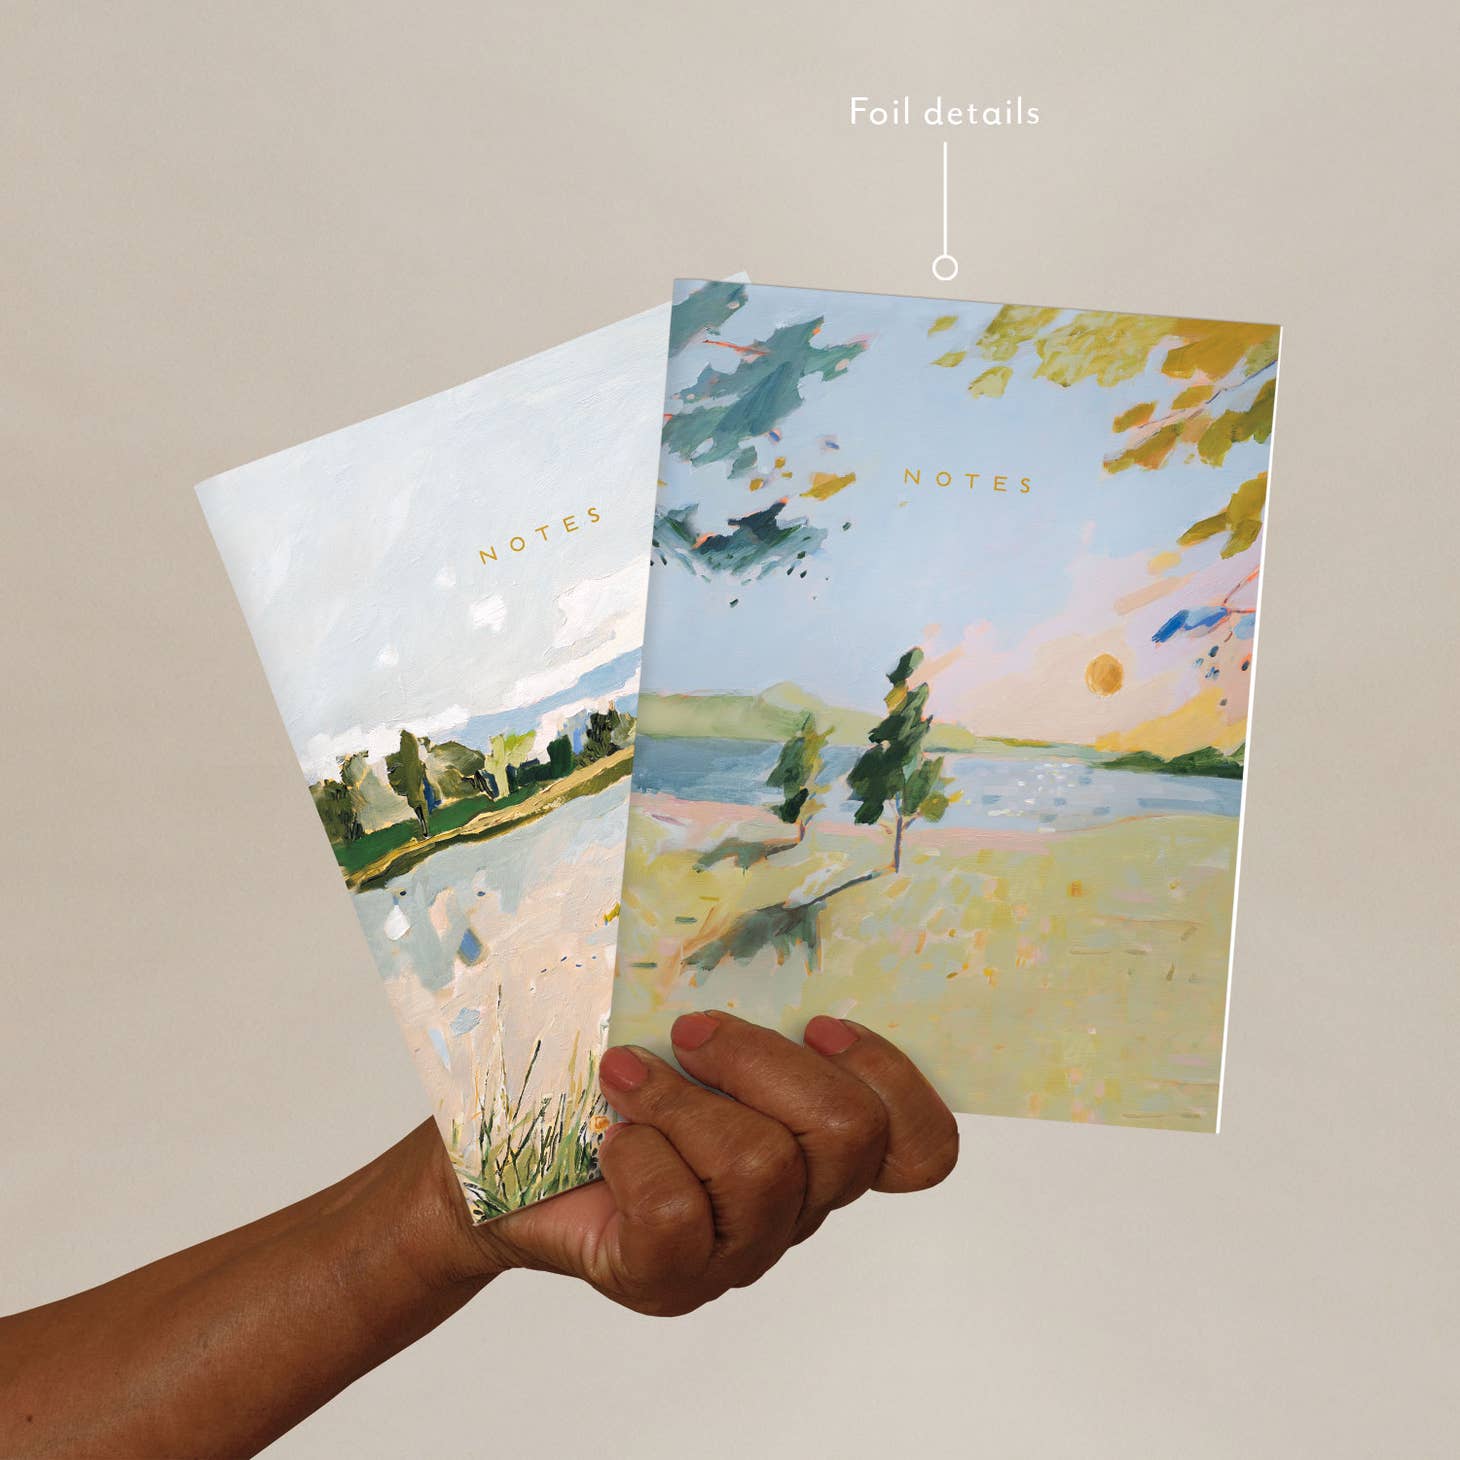 Embellished with foil details, these books have 64 pages each and are banded together with plantable seed paper packaging that is biodegradable and embedded with seeds. Set includes 1 lined notebook & 1 blank notebook.